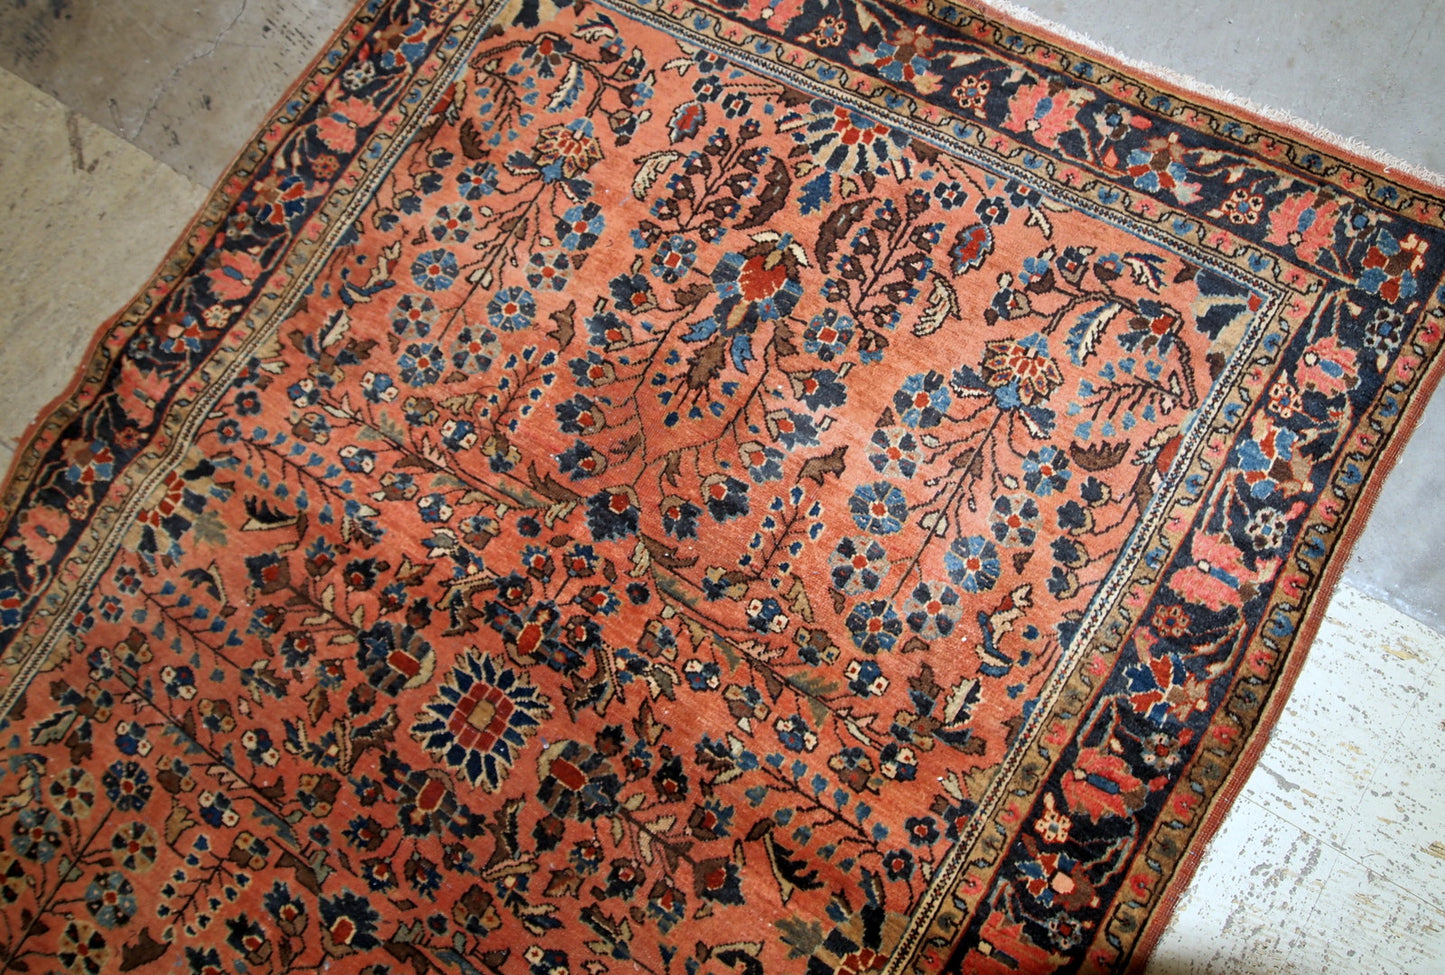 Handmade antique Sarouk rug in salmon shade. The rug is in original good condition from the beginning of 20th century.